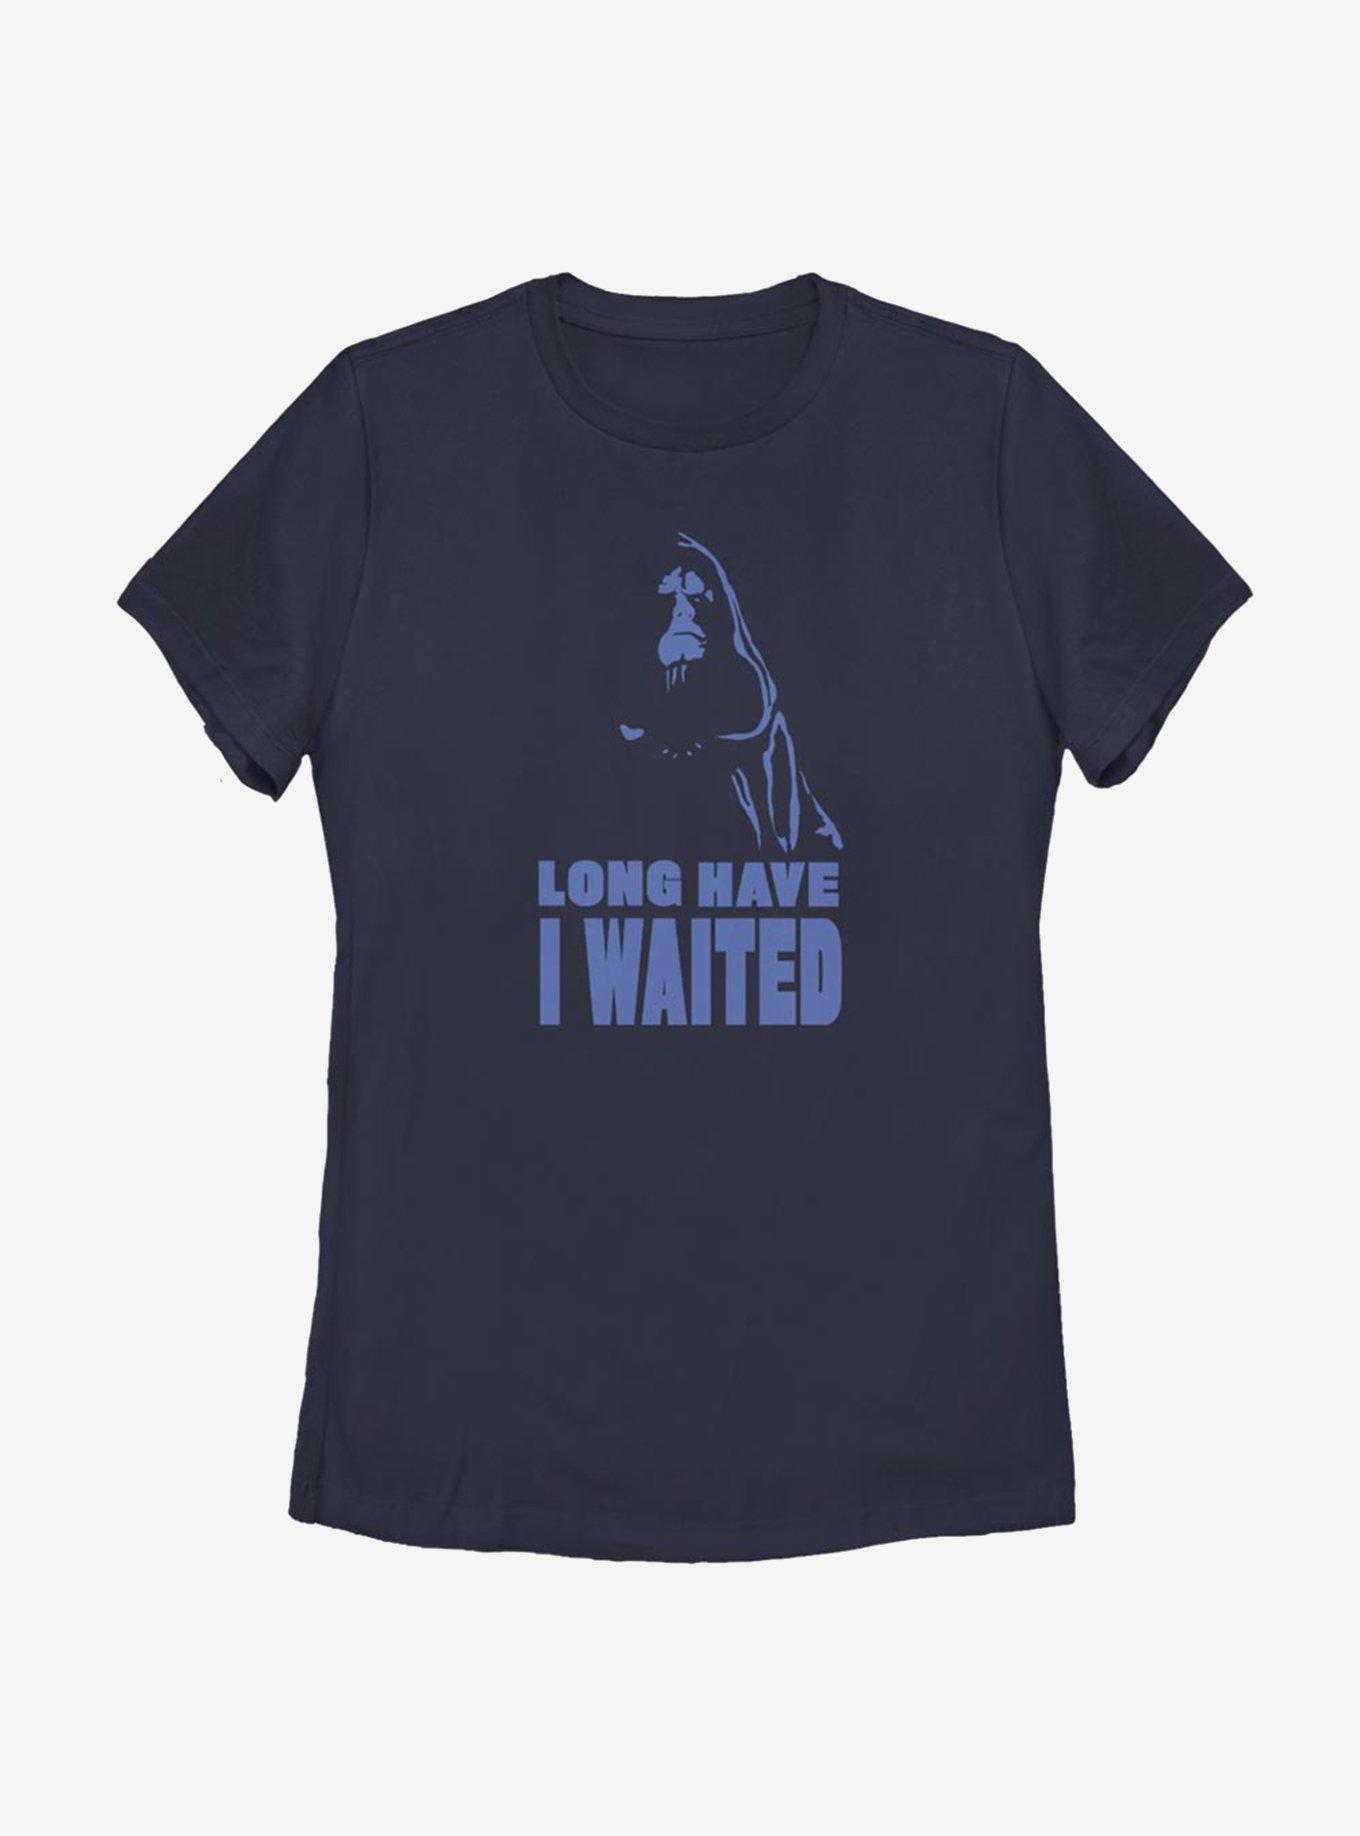 Star Wars: The Rise Of Skywalker Long Have I Waited Womens T-Shirt, NAVY, hi-res